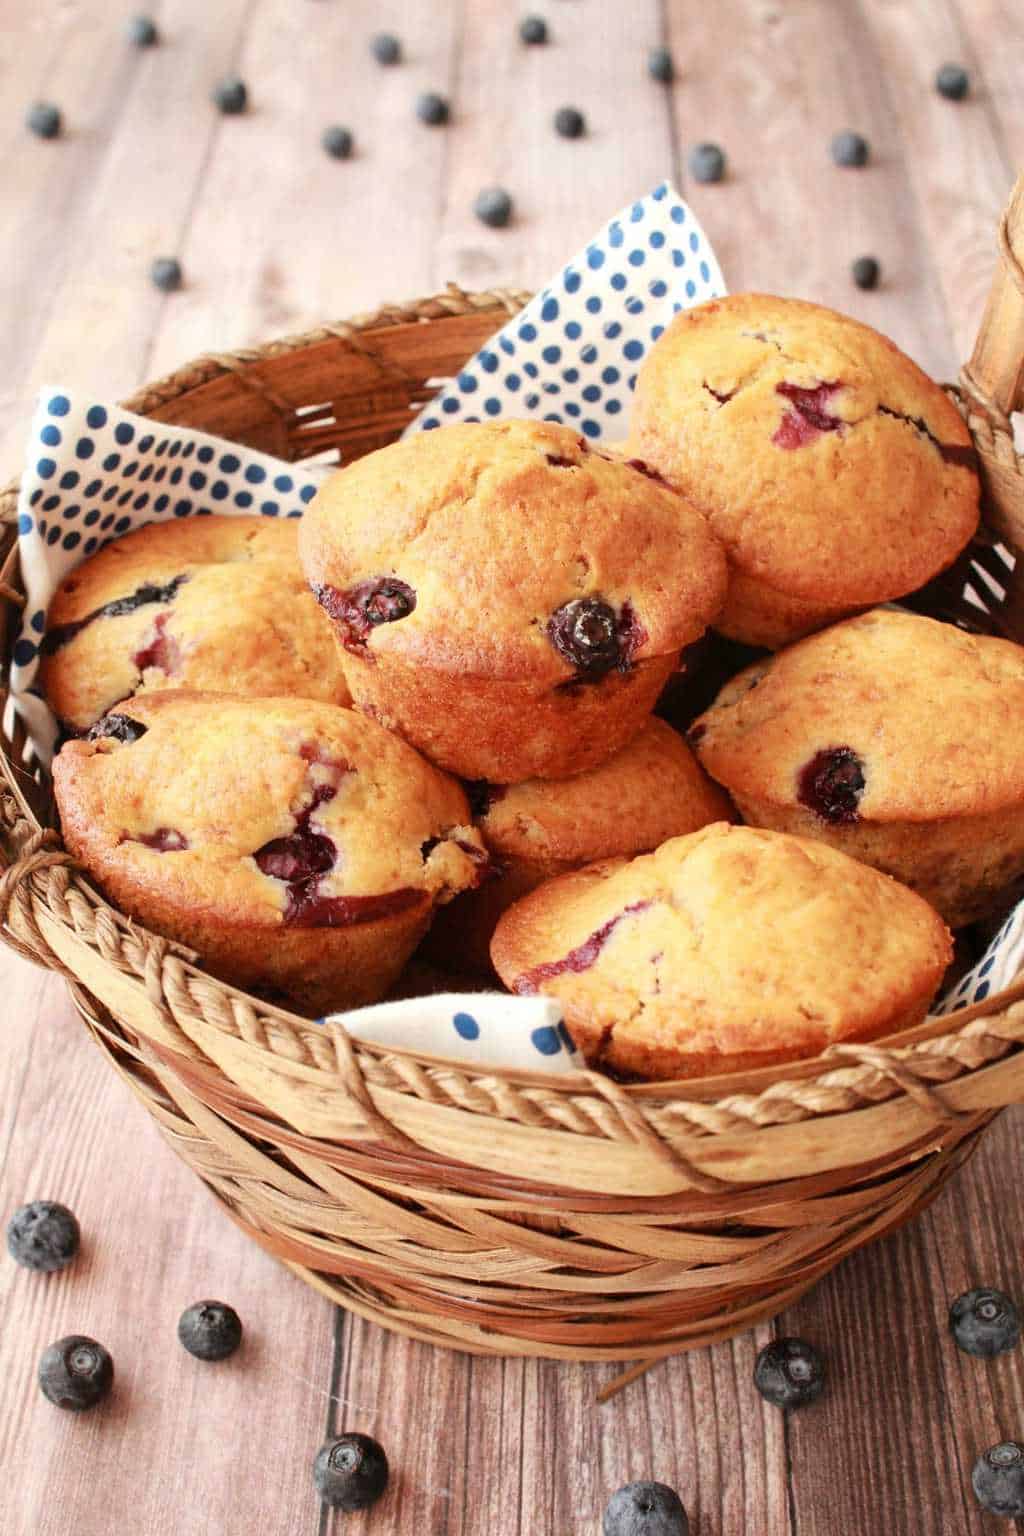 Vegan blueberry muffins in a woven basket with a blue and white napkin.